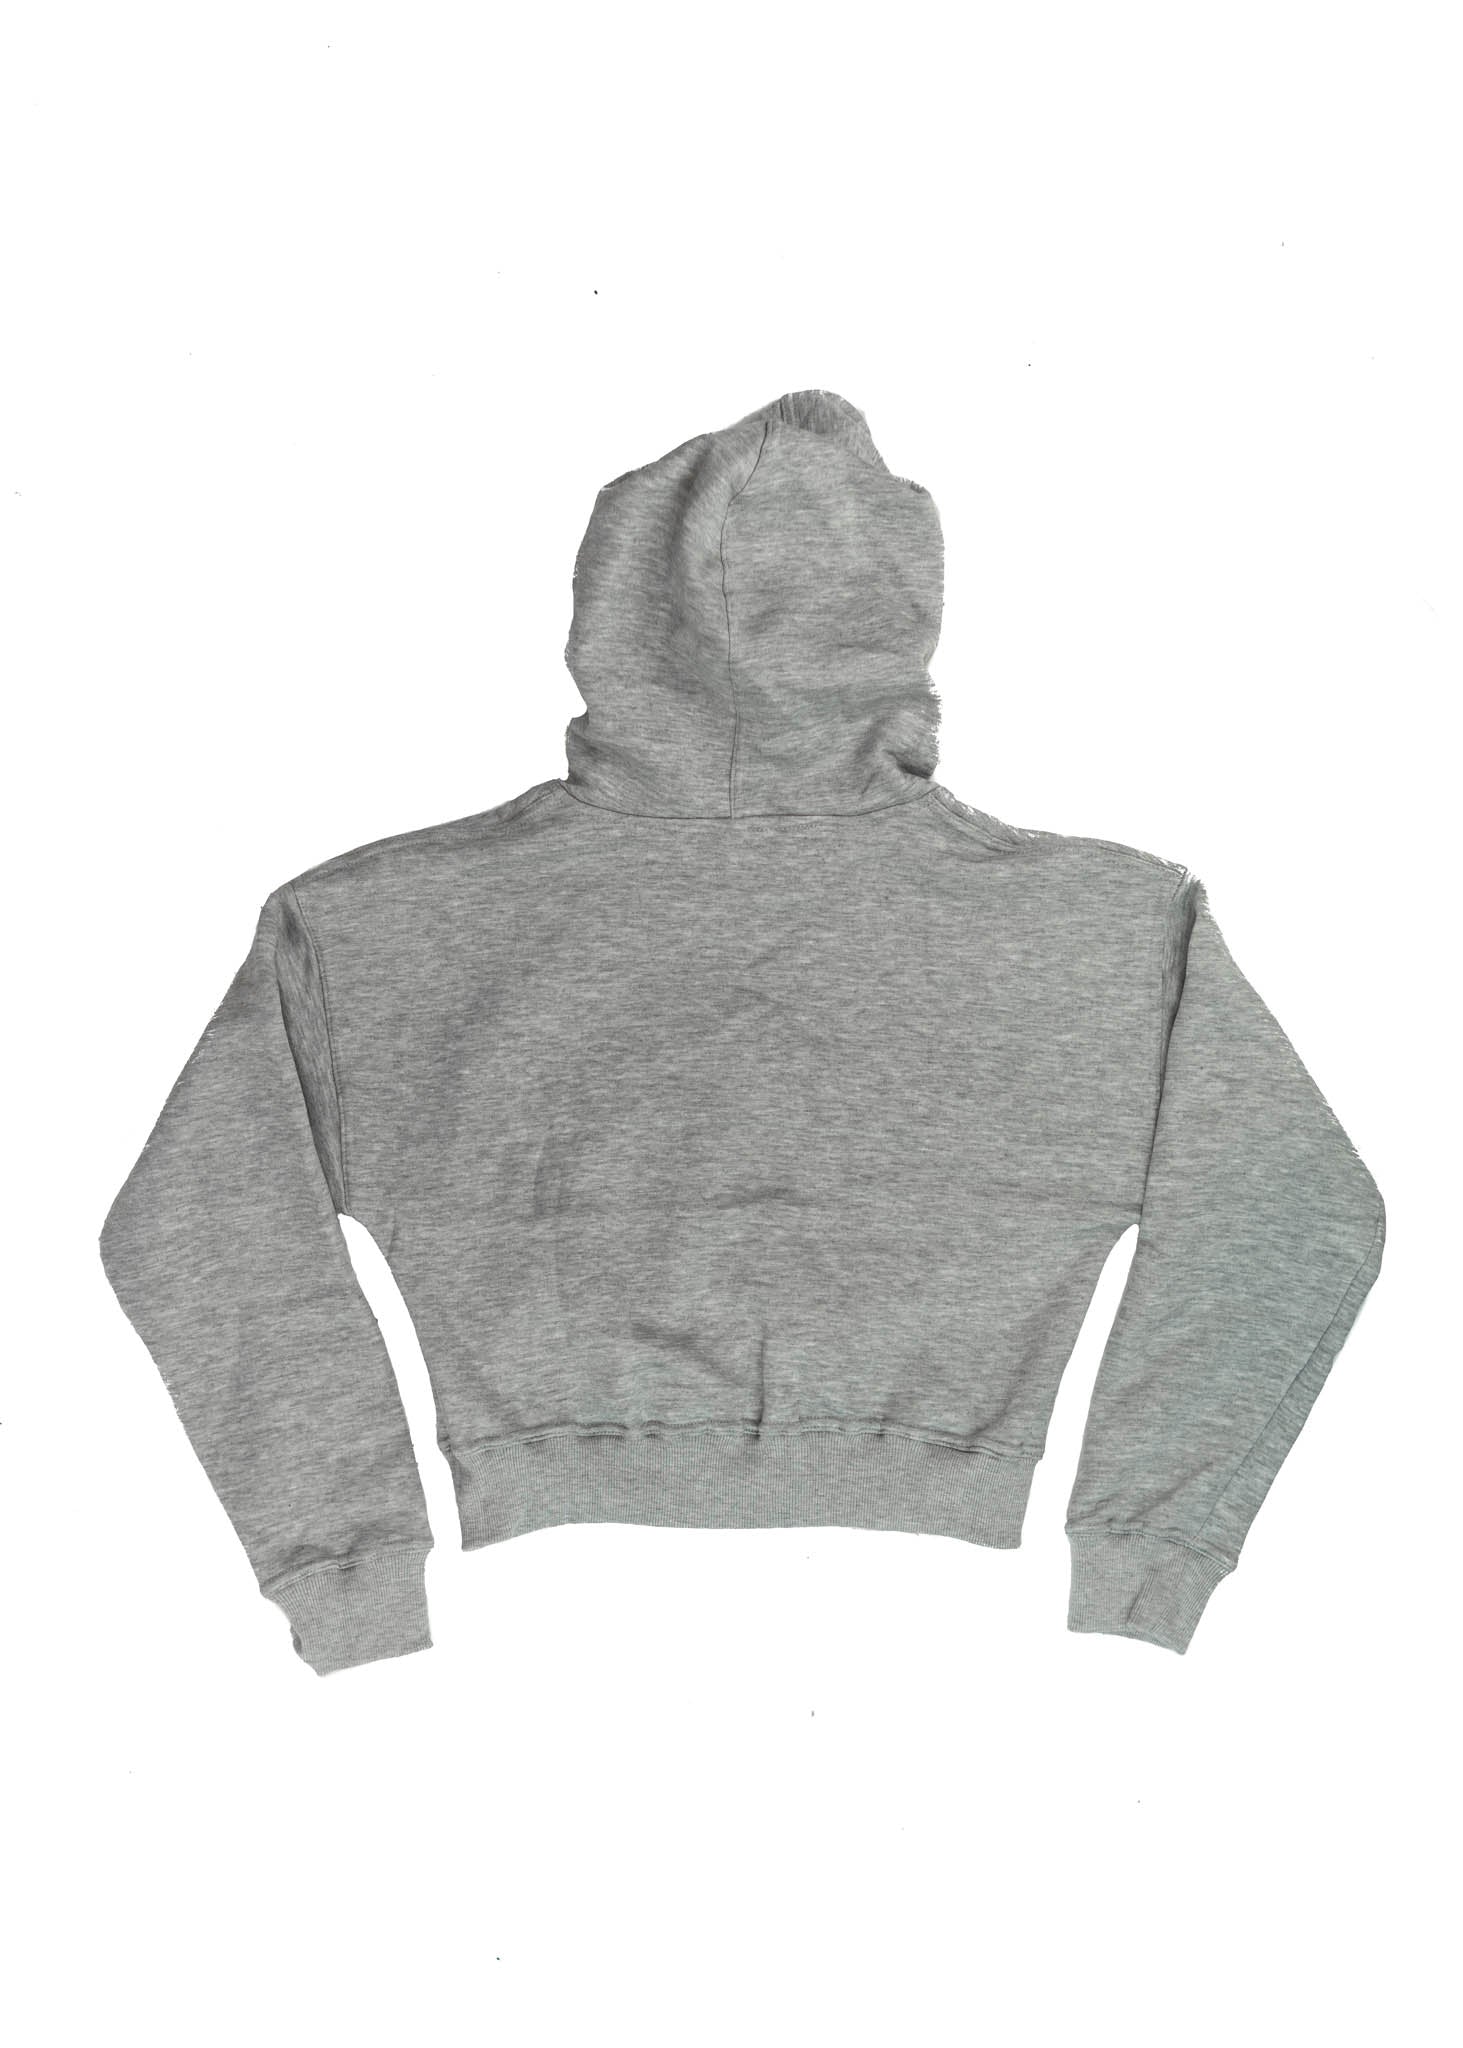 A grey Mercedes-Benz cropped hoodie for women. Photo is a back view of the cropped sweater with an embroidered W201 190E 2.5-16 Evo II. Fabric composition is 100% cotton. The material is soft, comfortable, breathable, and non-transparent. The style of this crop hoodie is long sleeve, crewneck with a hood, hooded, with embroidery on the chest.